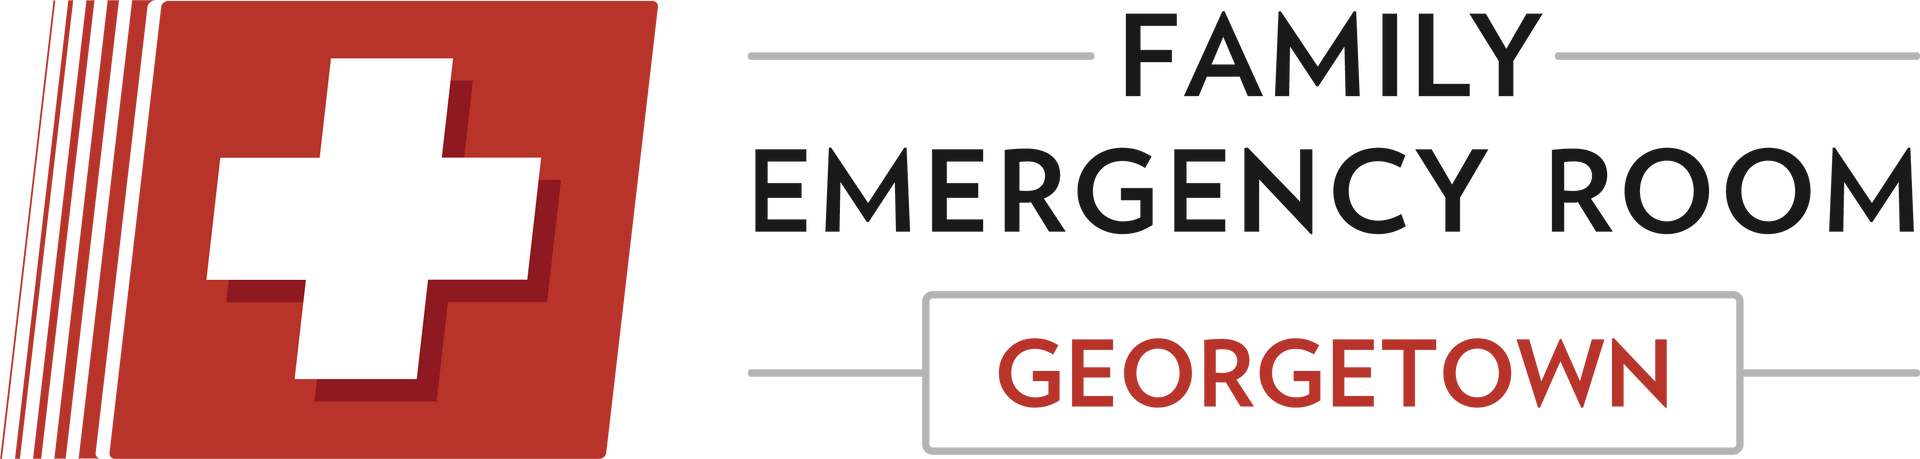 Family Emergency Room at Georgetown Logo